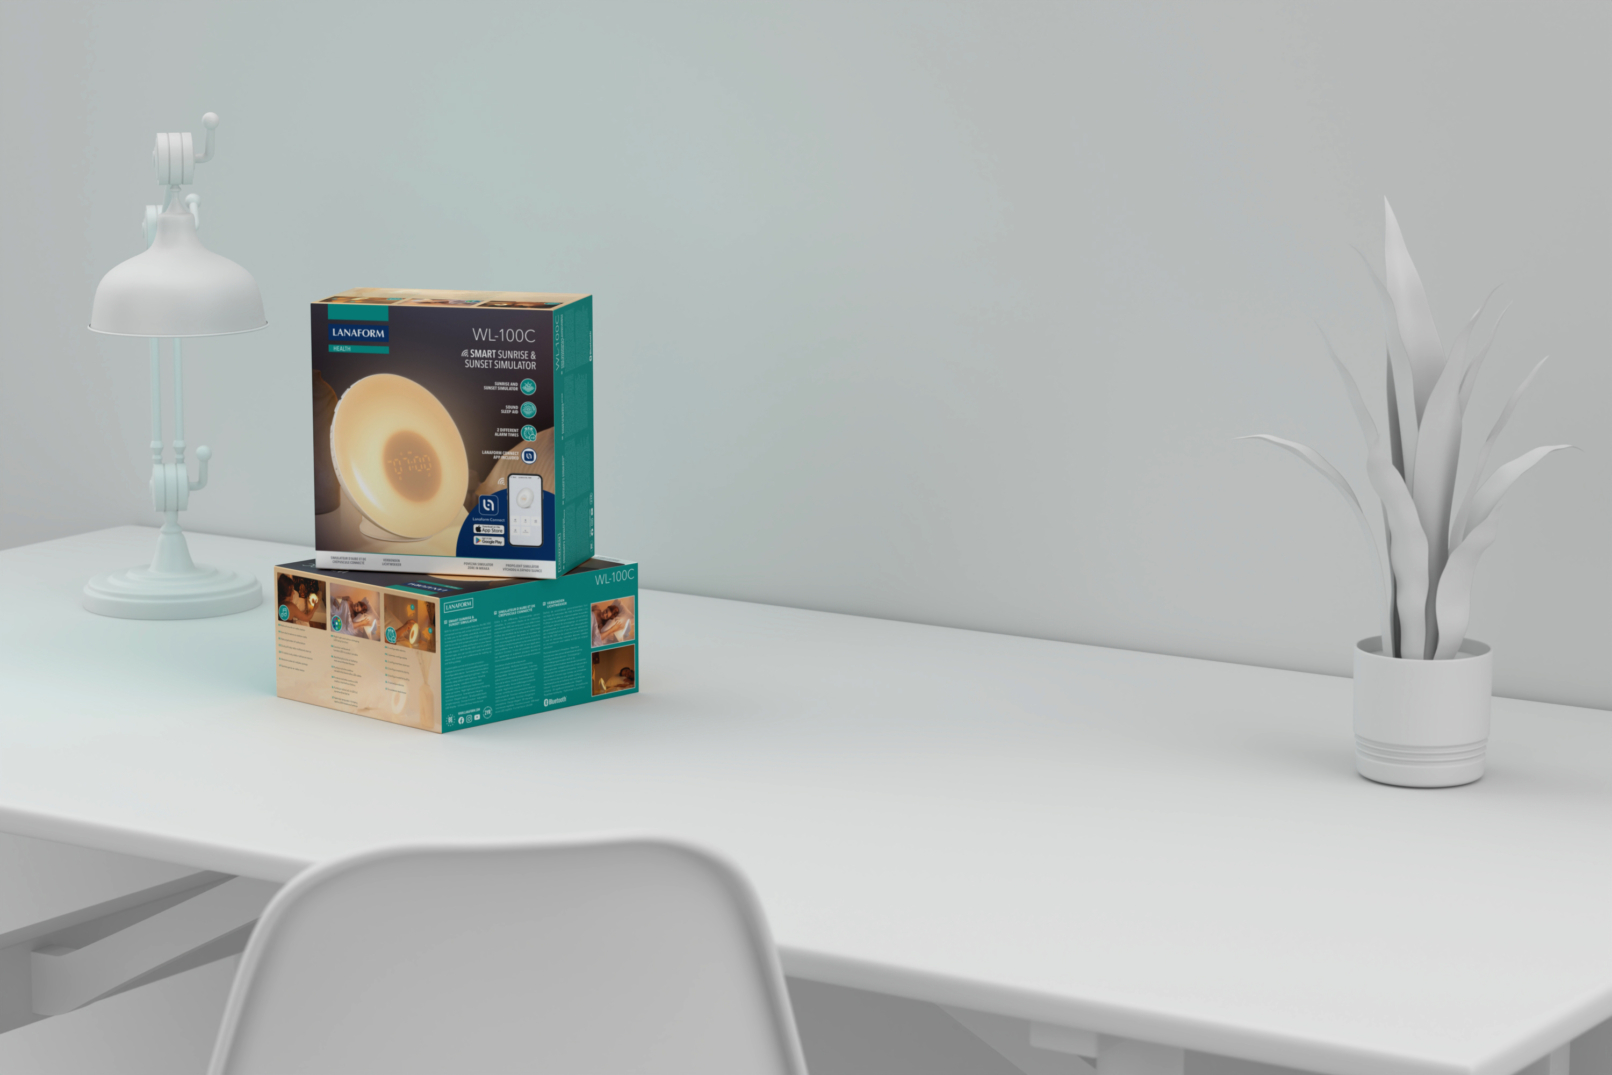 Blue, gold and green packagings of the WL-100C Smart Sunrise & Sunset Simulator on a table, next to a lamp and a plant